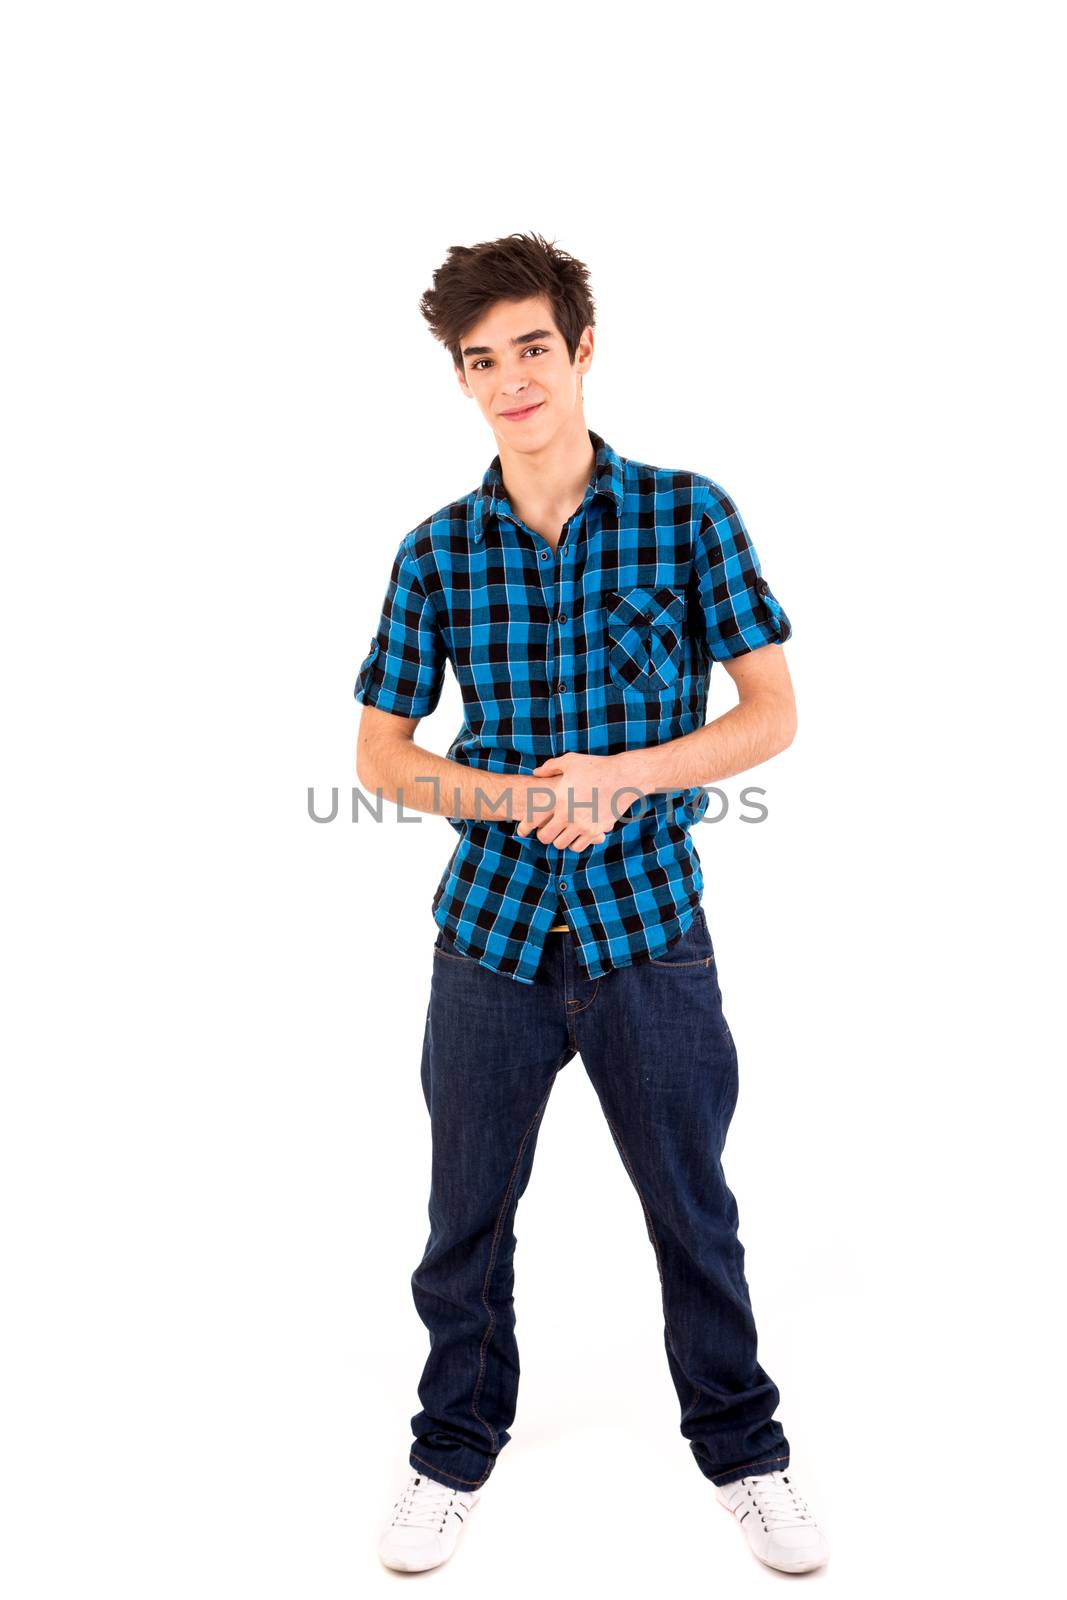 Studio picture of a young and handsome man posing